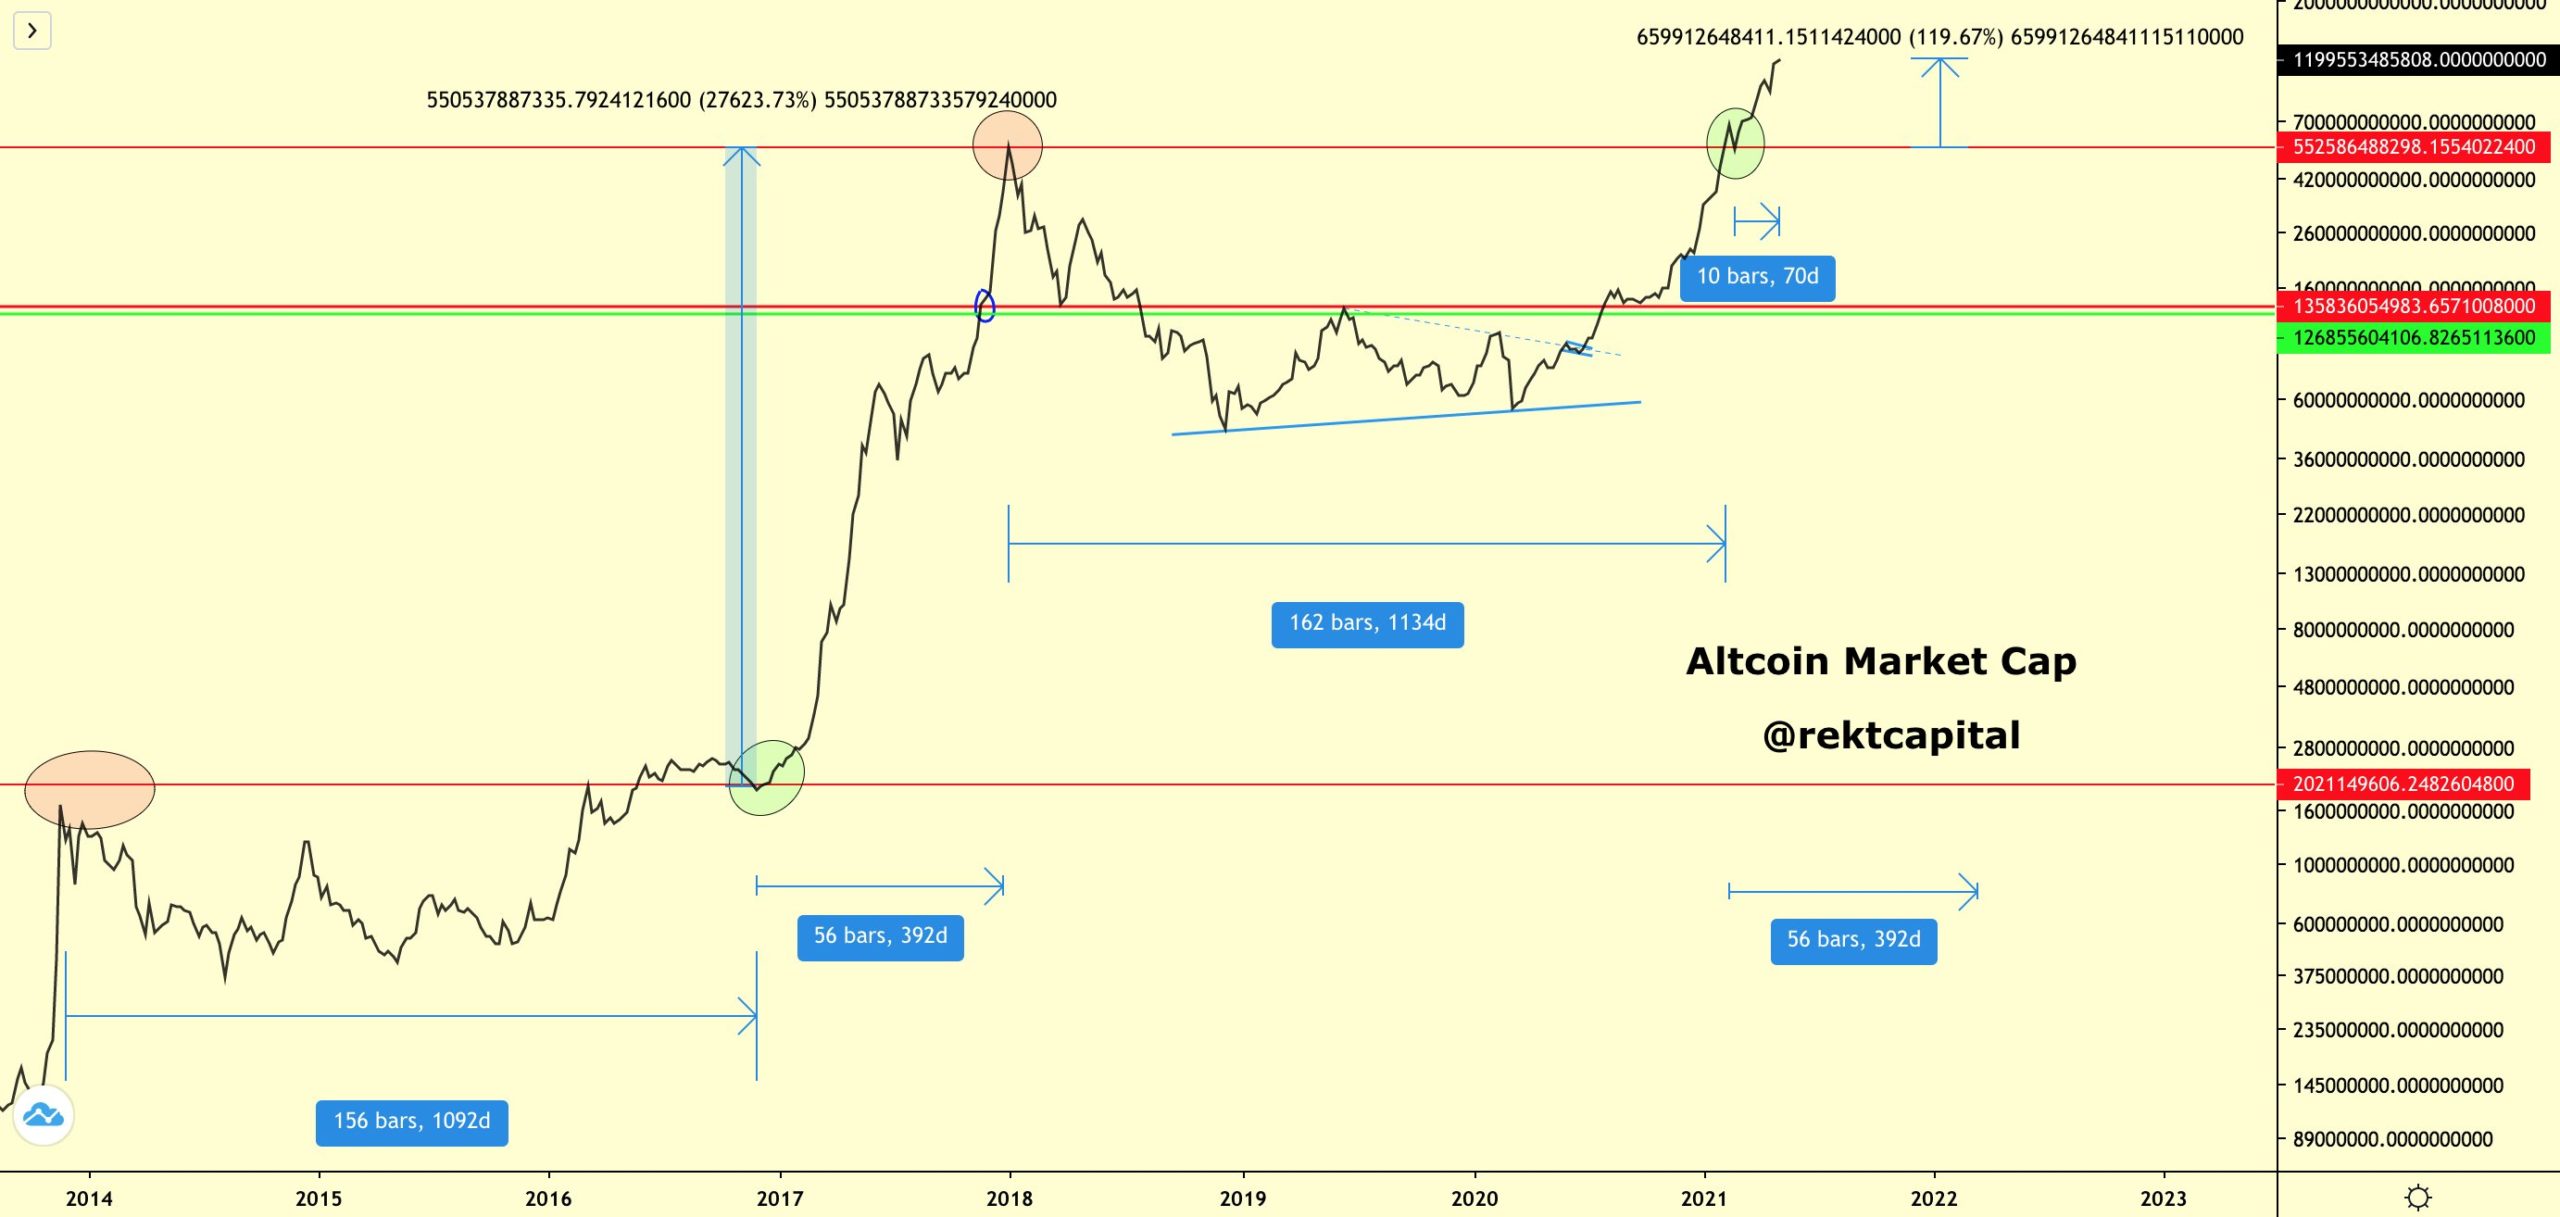 Altcoins just repeated a move which could launch them 27,000% higher in 2021